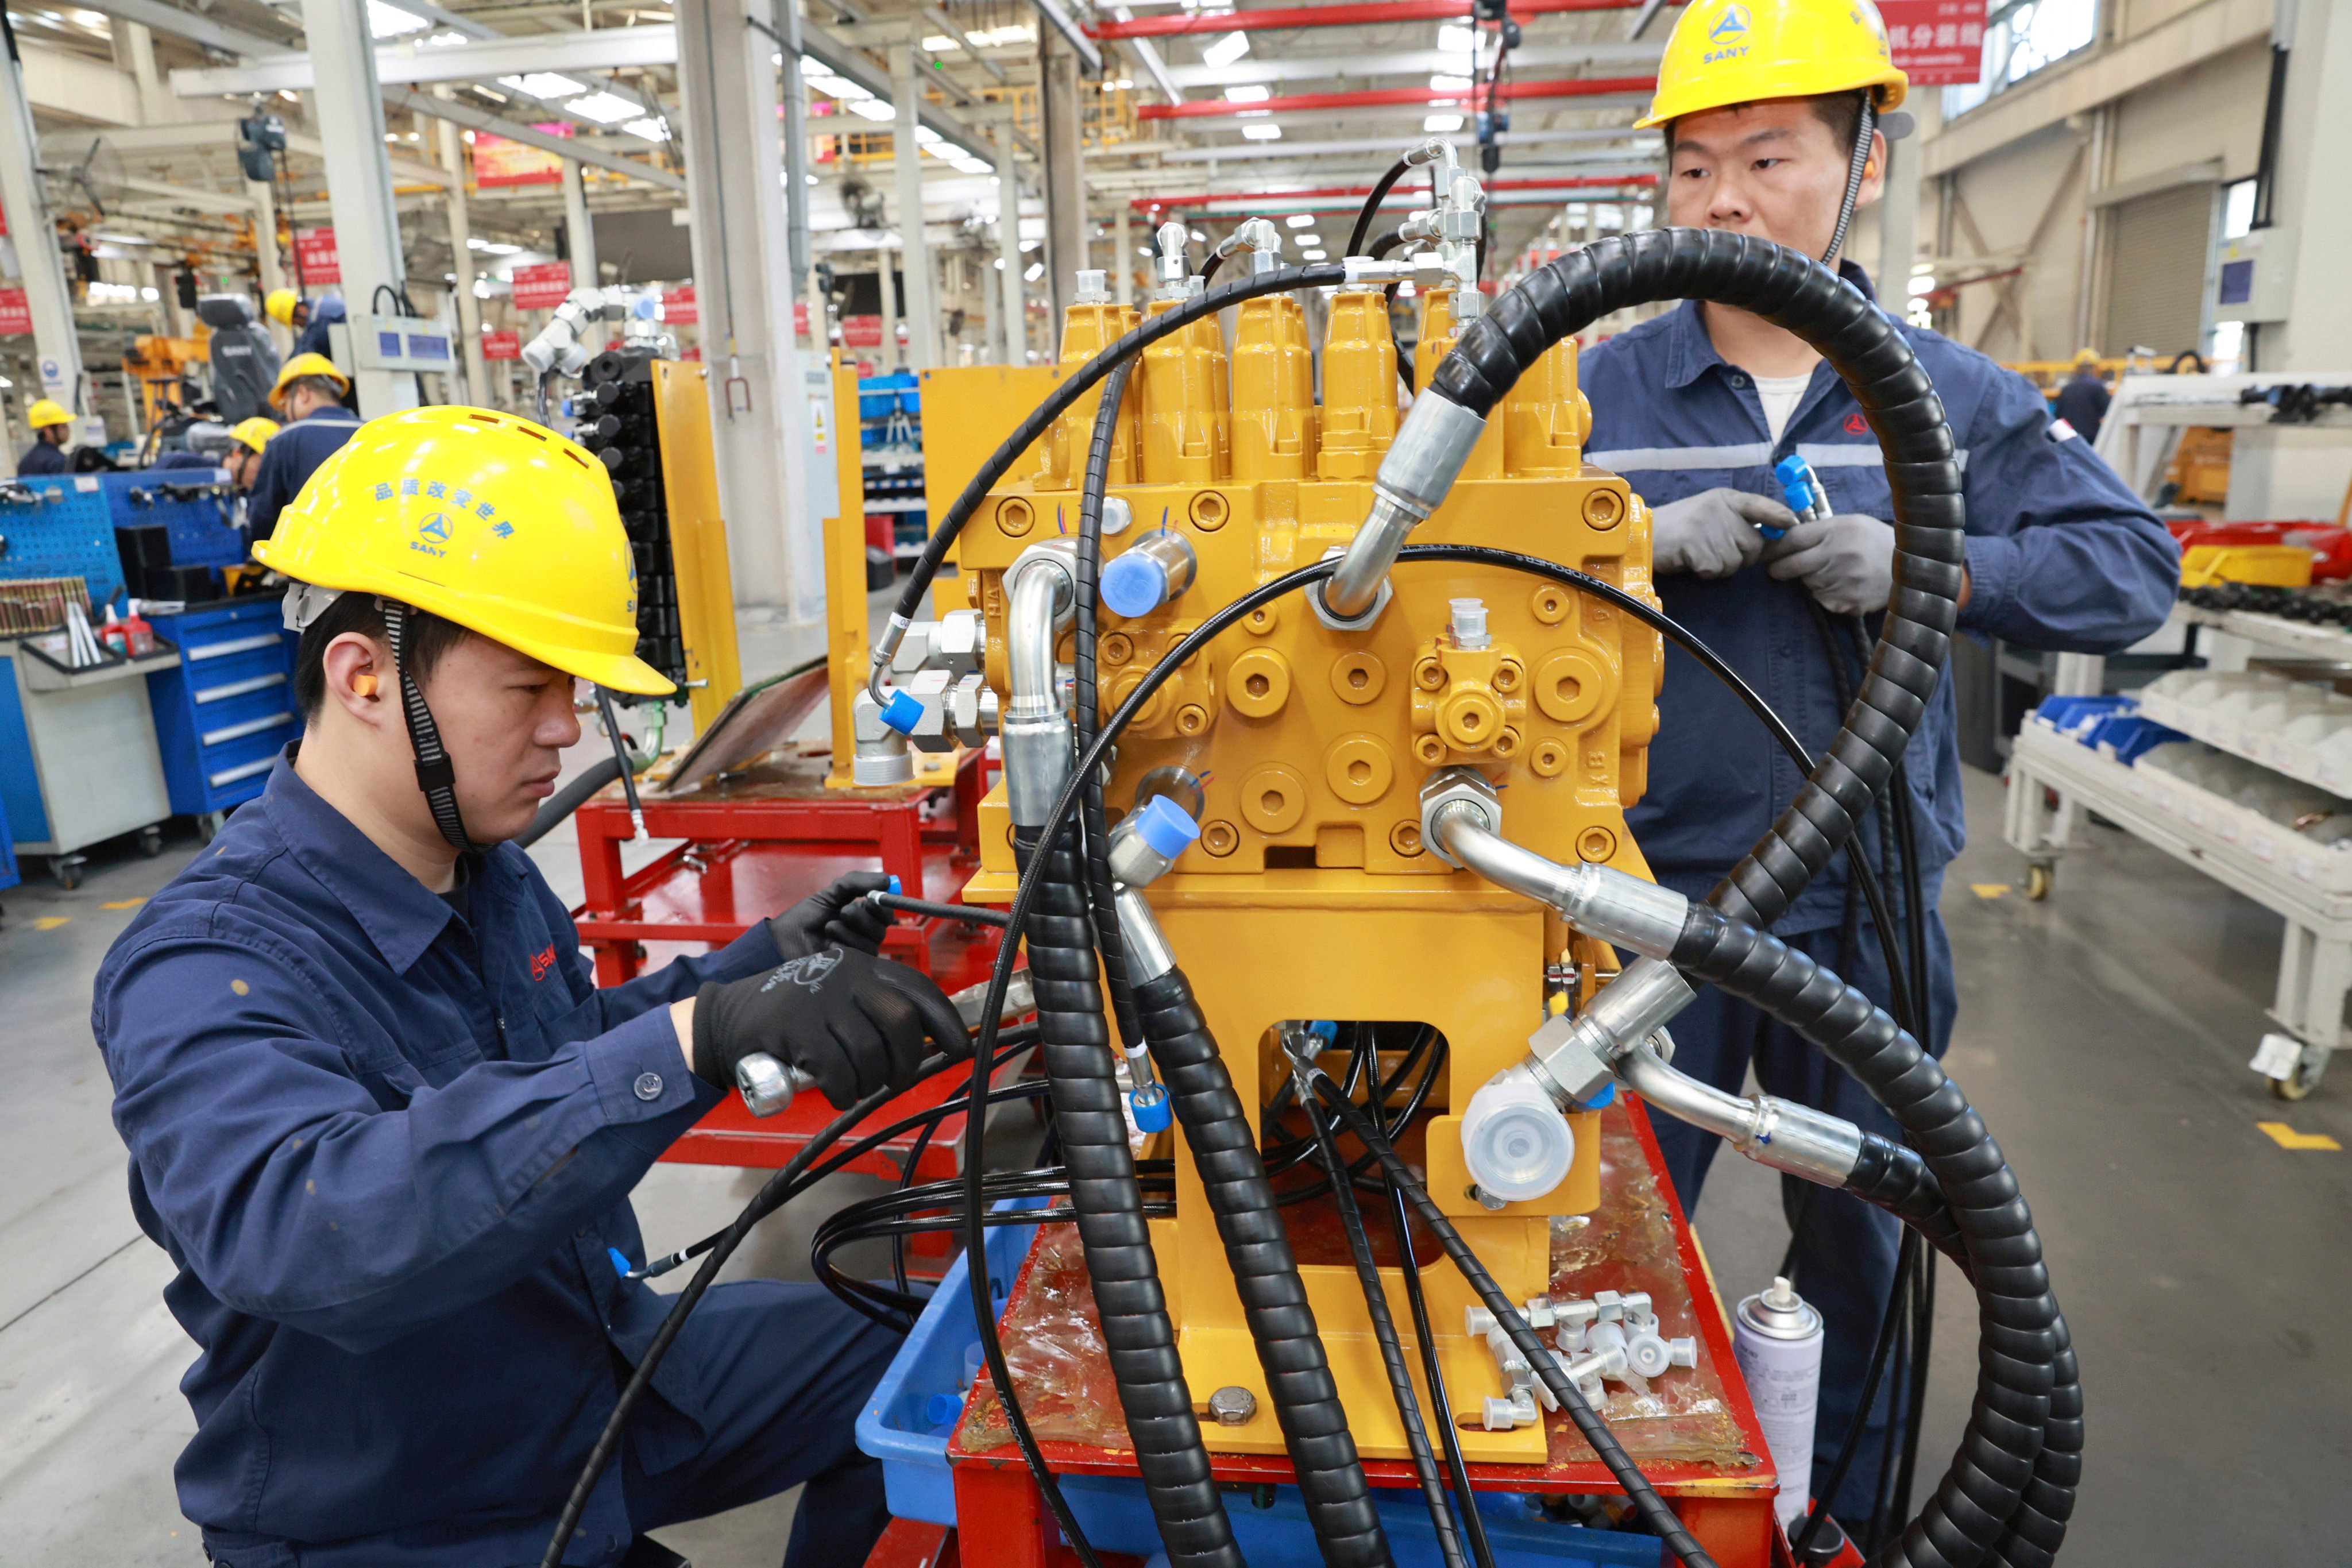 Both China’s official manufacturing purchasing managers’ index (PMI) and the Caixin/S&P Global manufacturing PMI both fell into contraction in October. Photo: Chinatopix via AP